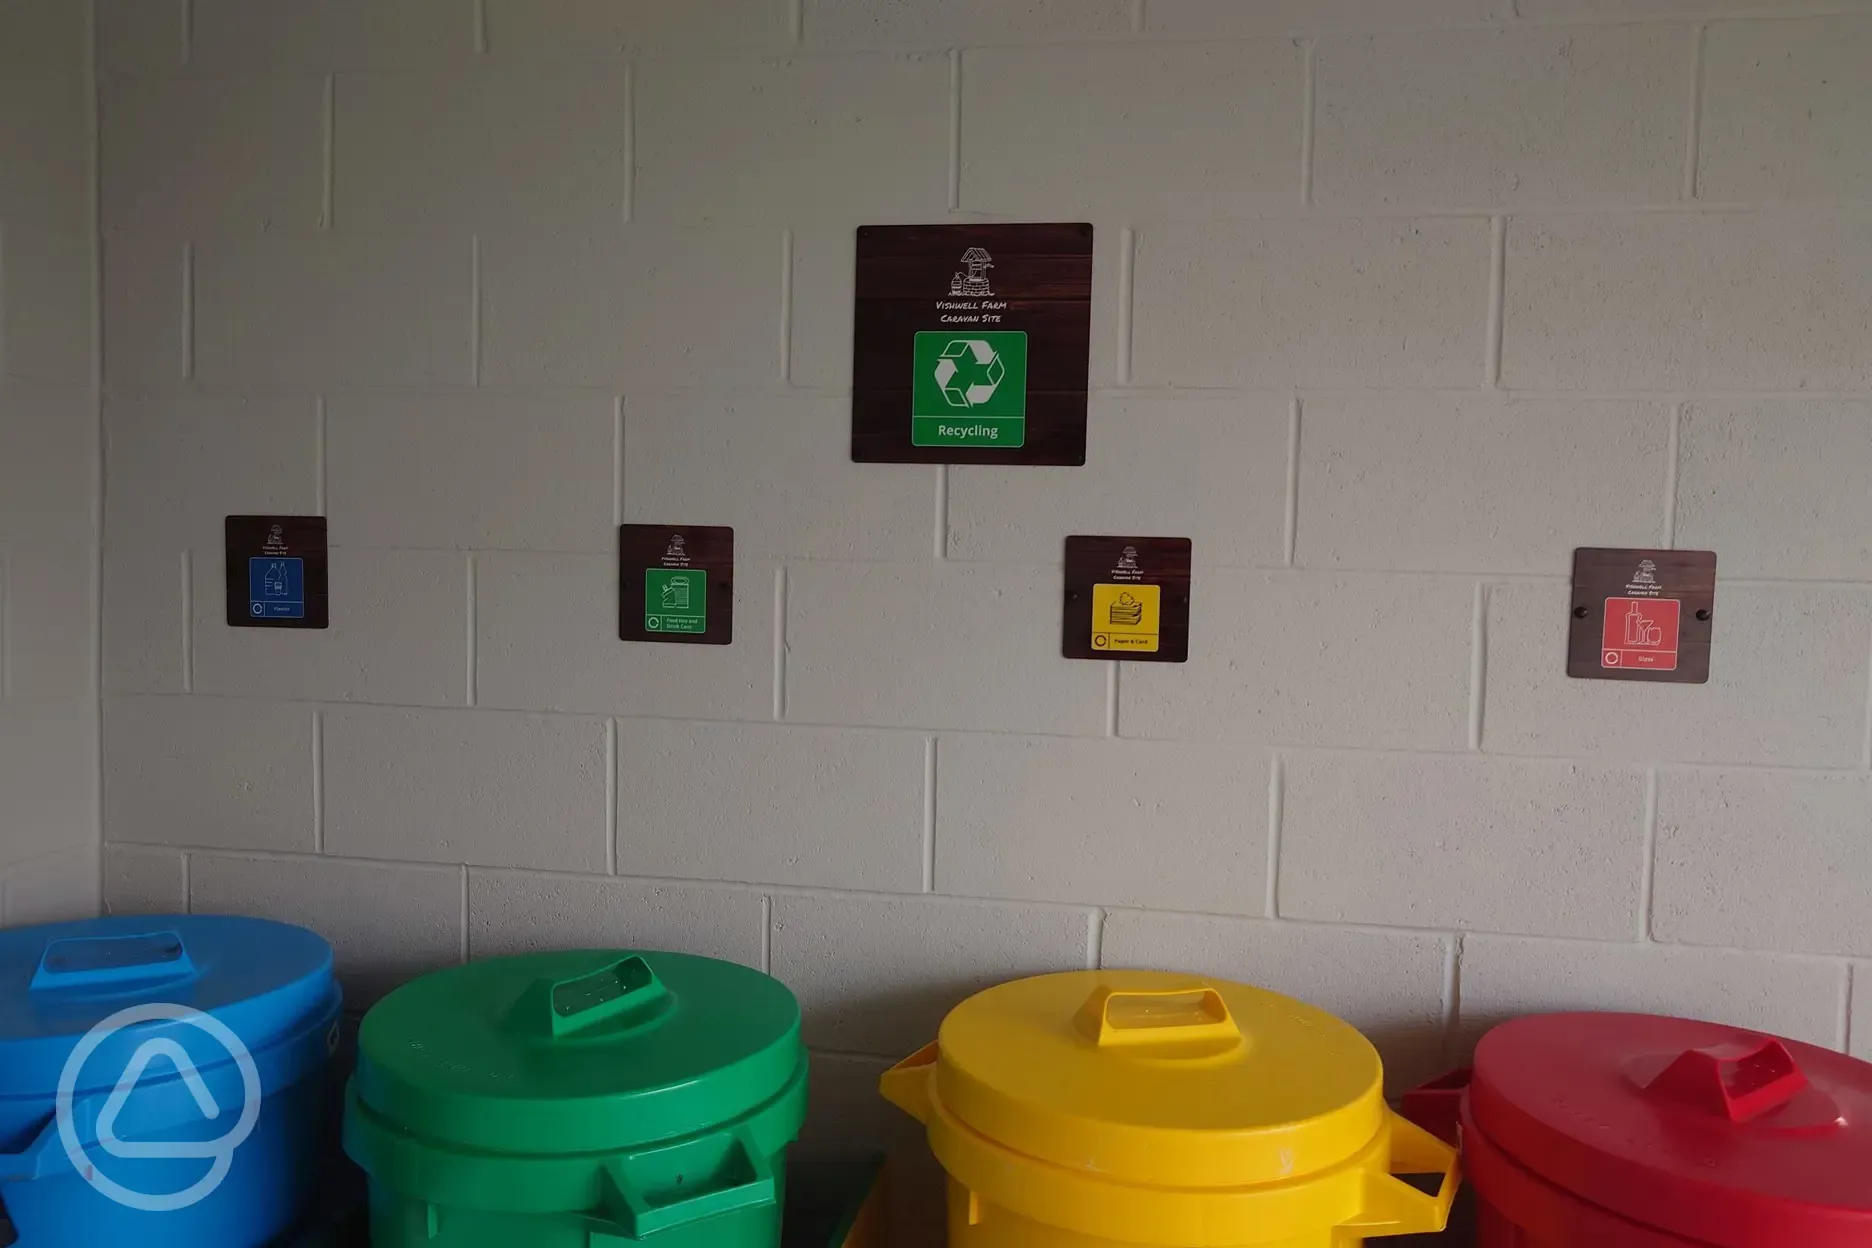 Recycling area